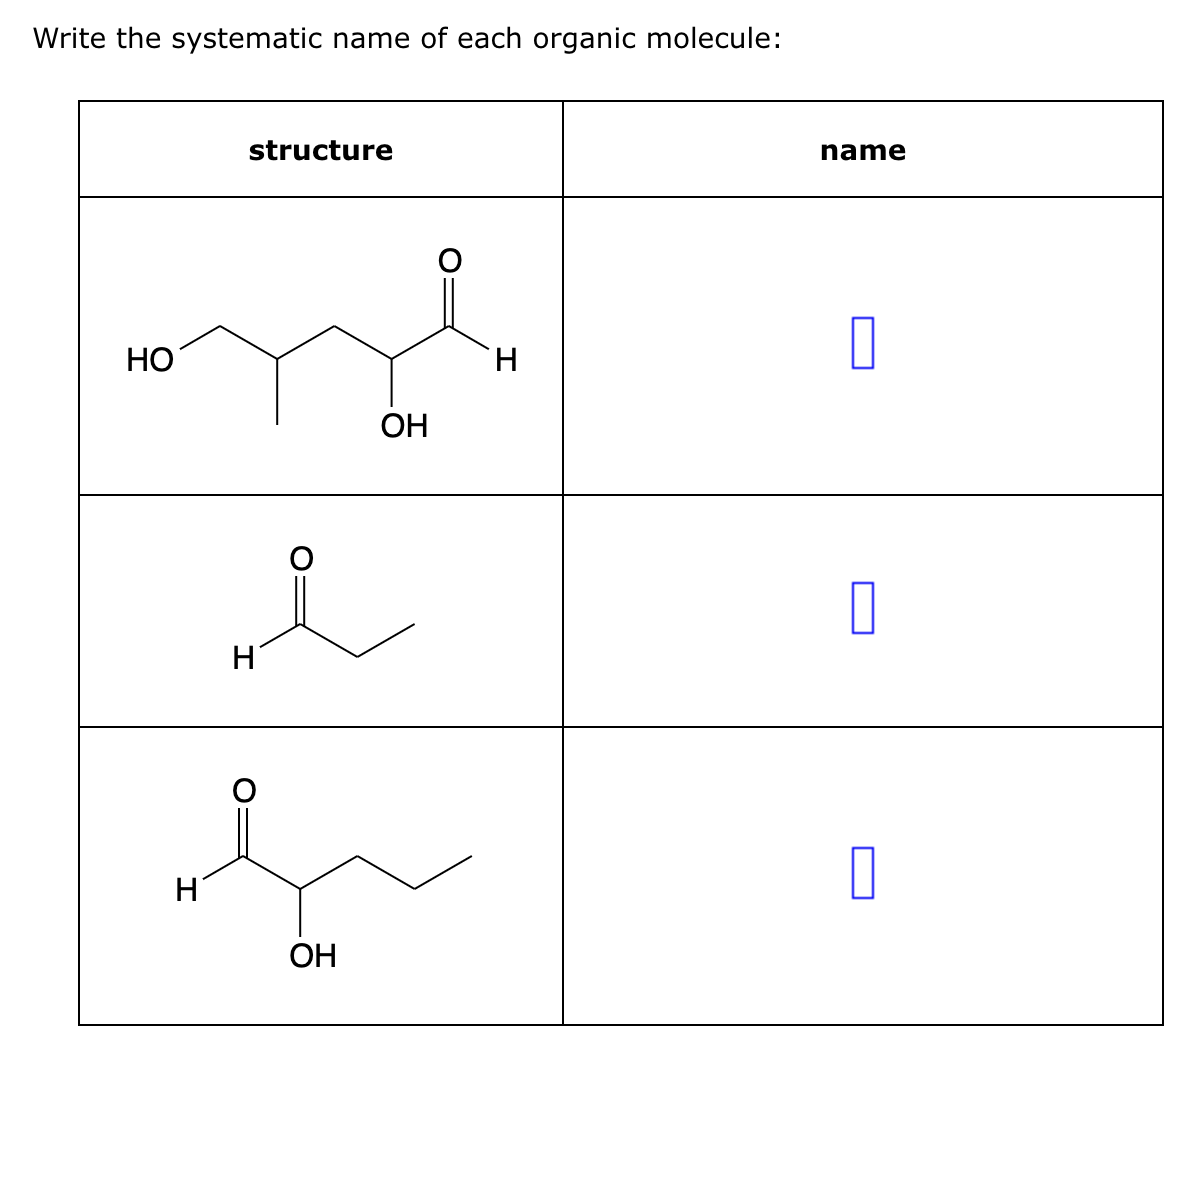 Write the systematic name of each organic molecule:
onl
ОН
НО
structure
H
H
я
в
ОН
н
name
О
О